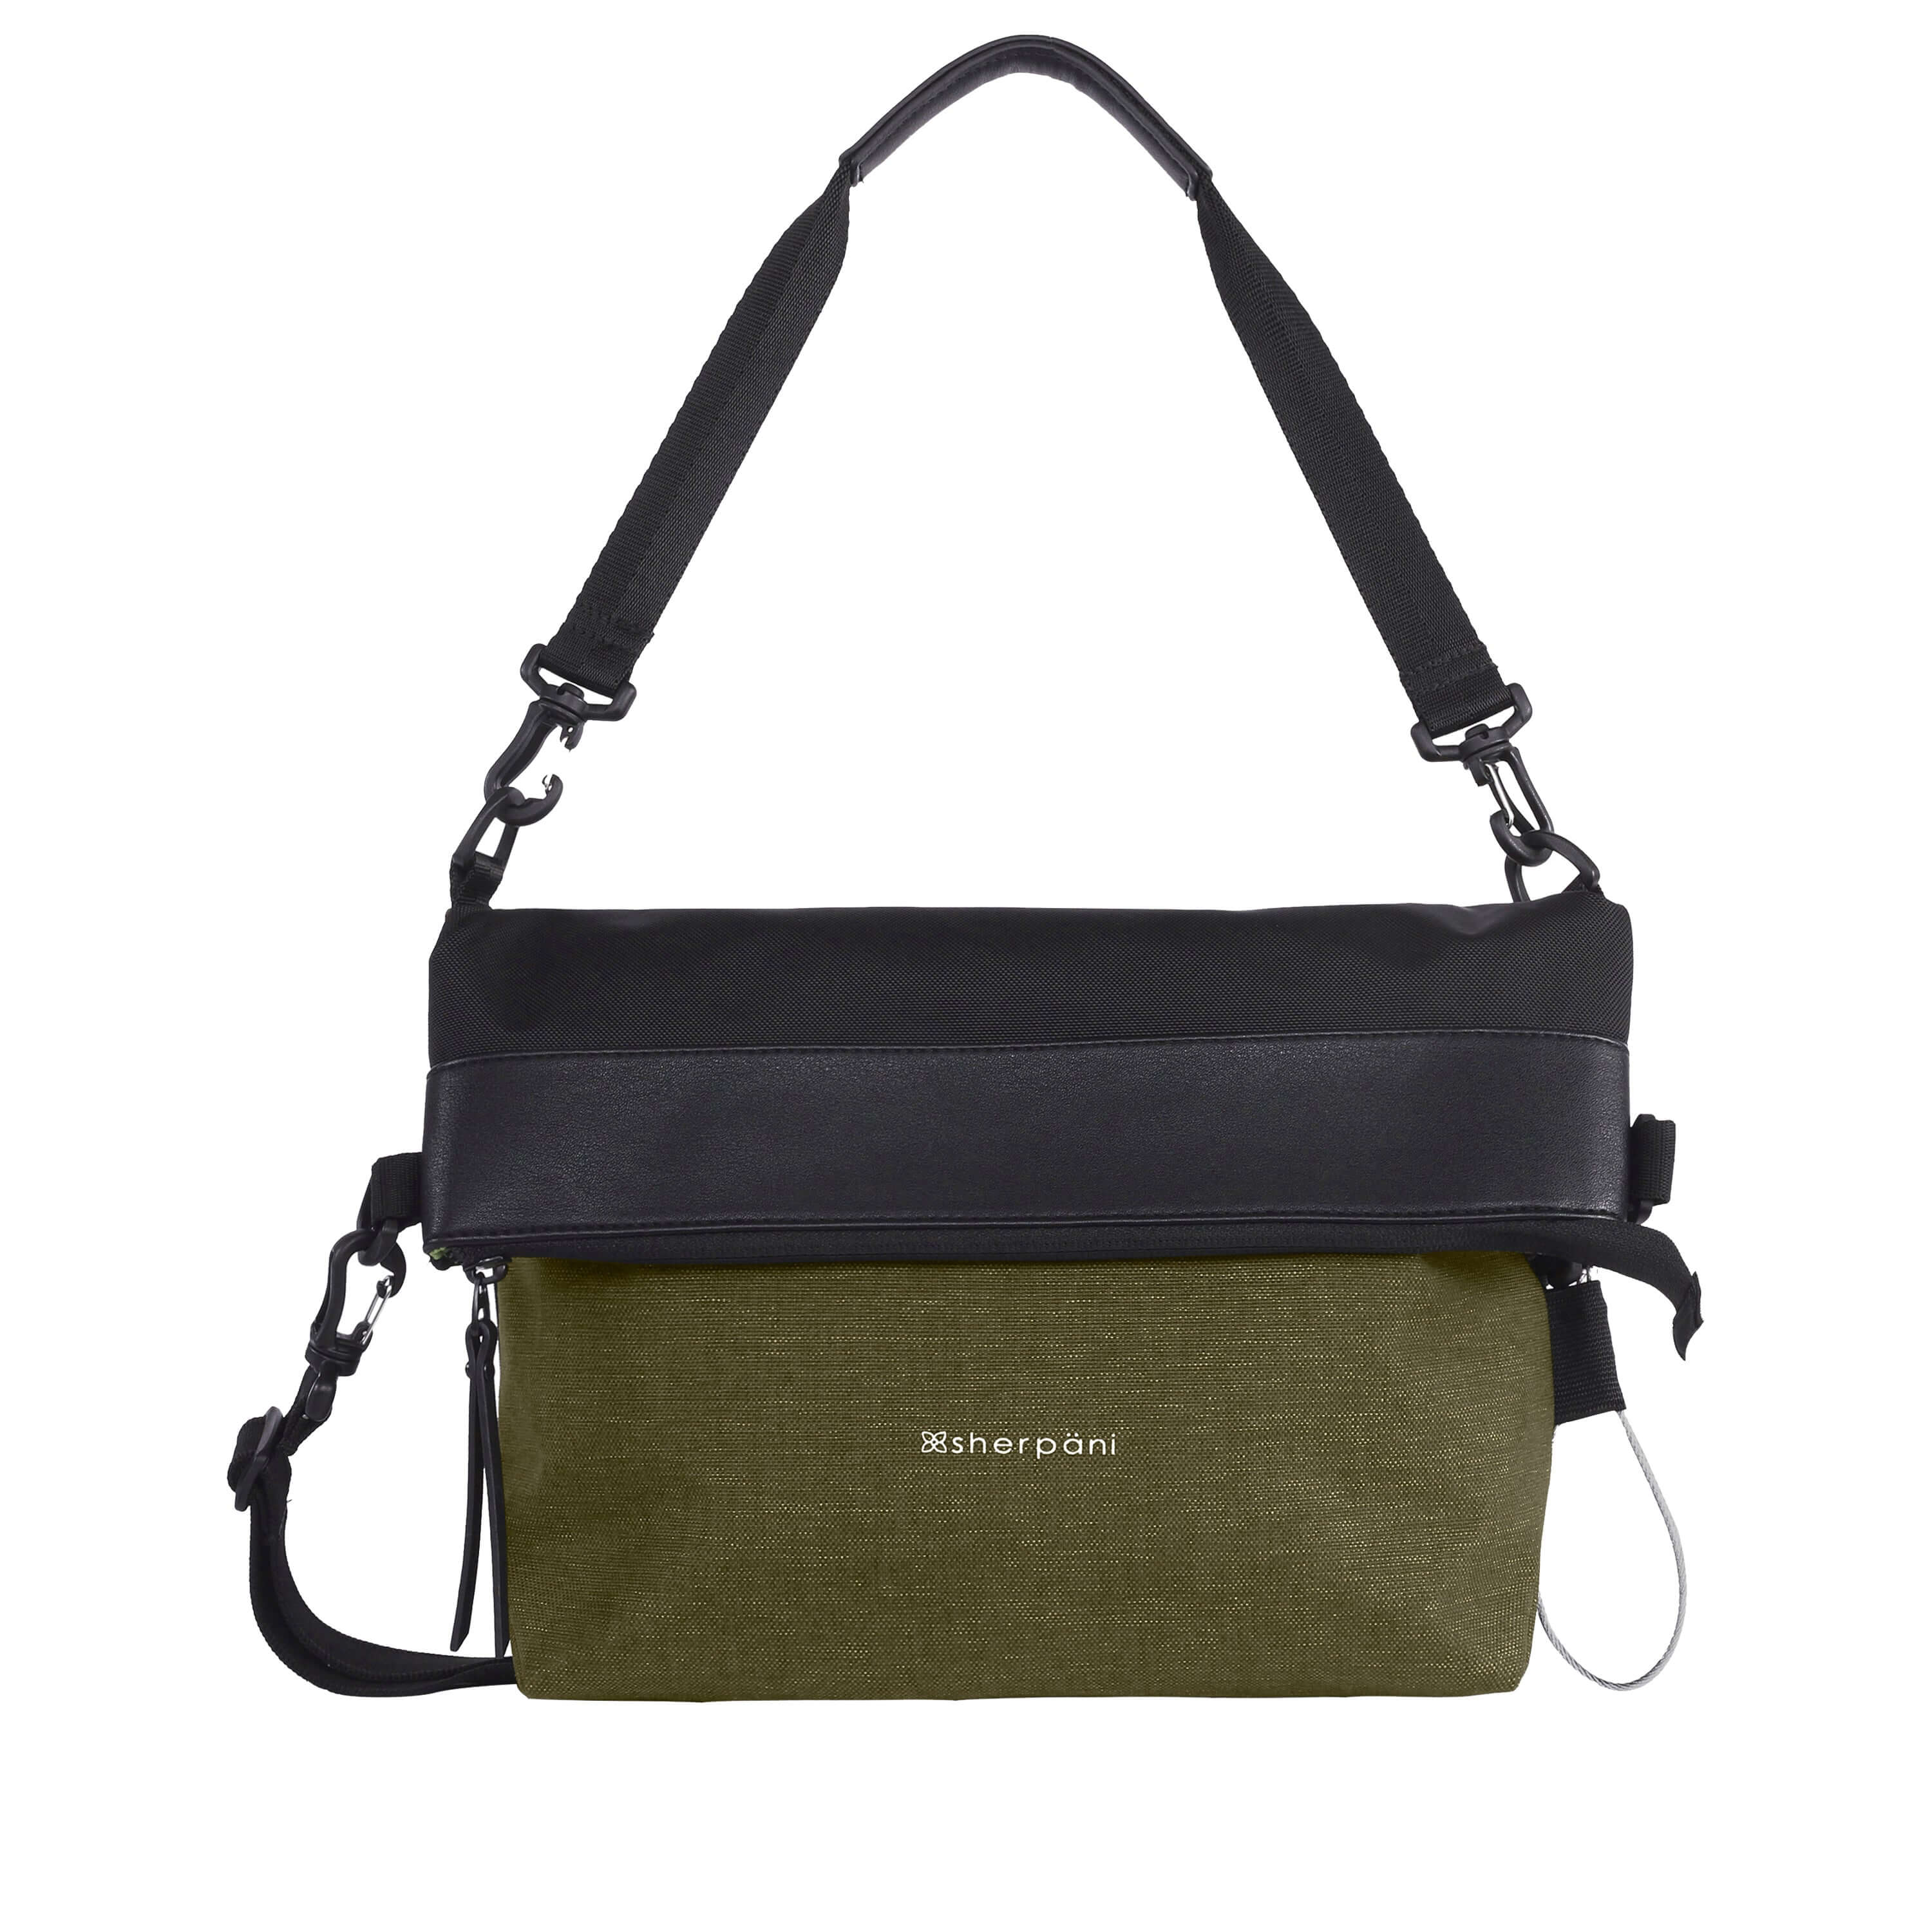  Flat front view of Sherpani&#39;s Anti-Theft bag, the Vale AT in Loden with vegan leather accents in black. The top is folded over creating a two-toned reversible overlap. A chair loop lock is clipped onto one side, secured in place by an elastic tab. It has an adjustable/detachable crossbody strap, and a second detachable strap fixed at a shorter length.